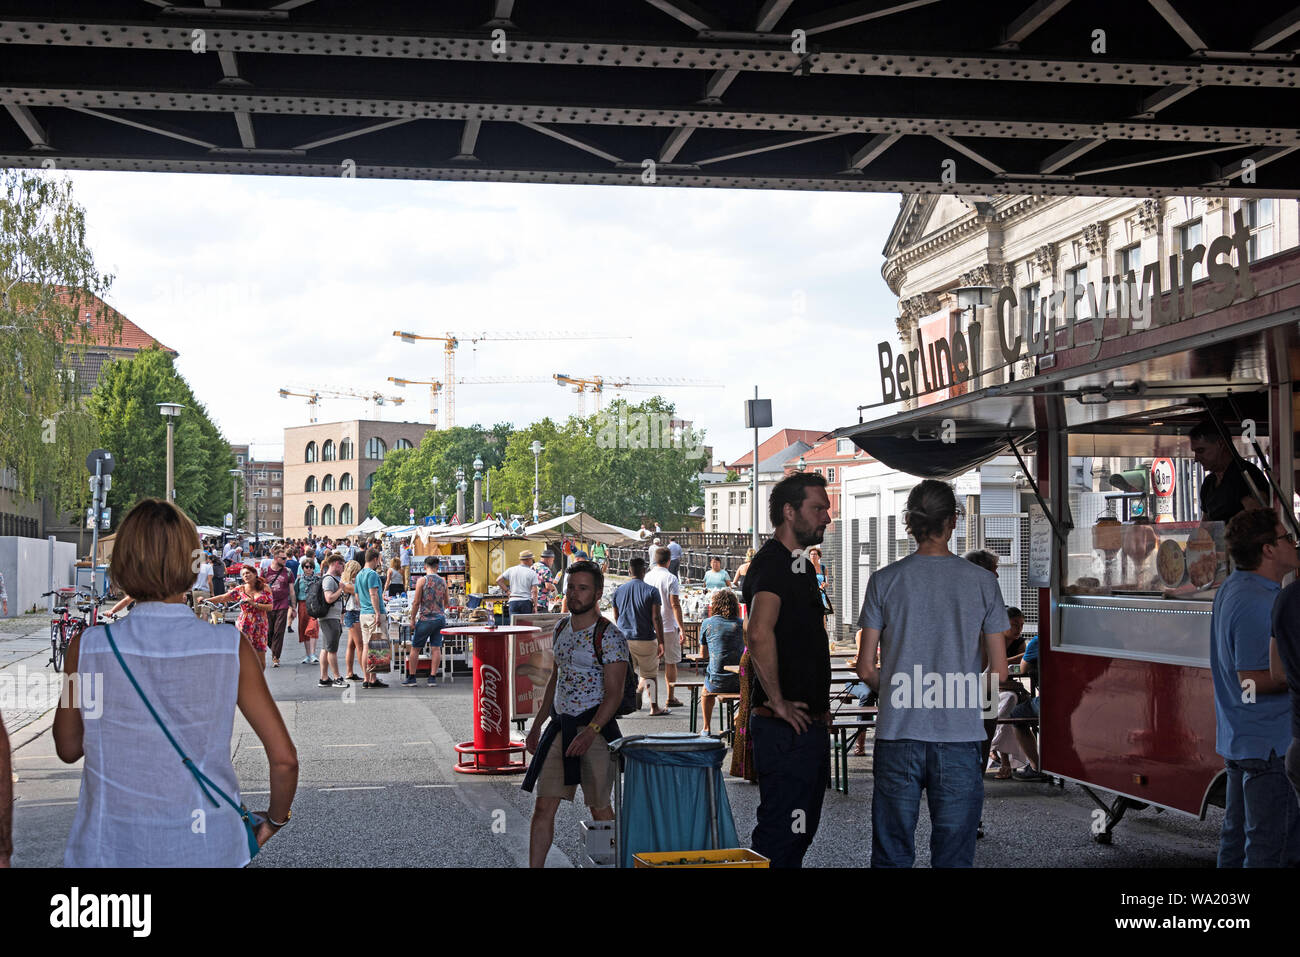 Shoppers at a Currywurst stall under the Stadtbahn Bridge at the Antique and Book Market near the Bode Museum, Berlin, Germany. Stock Photo